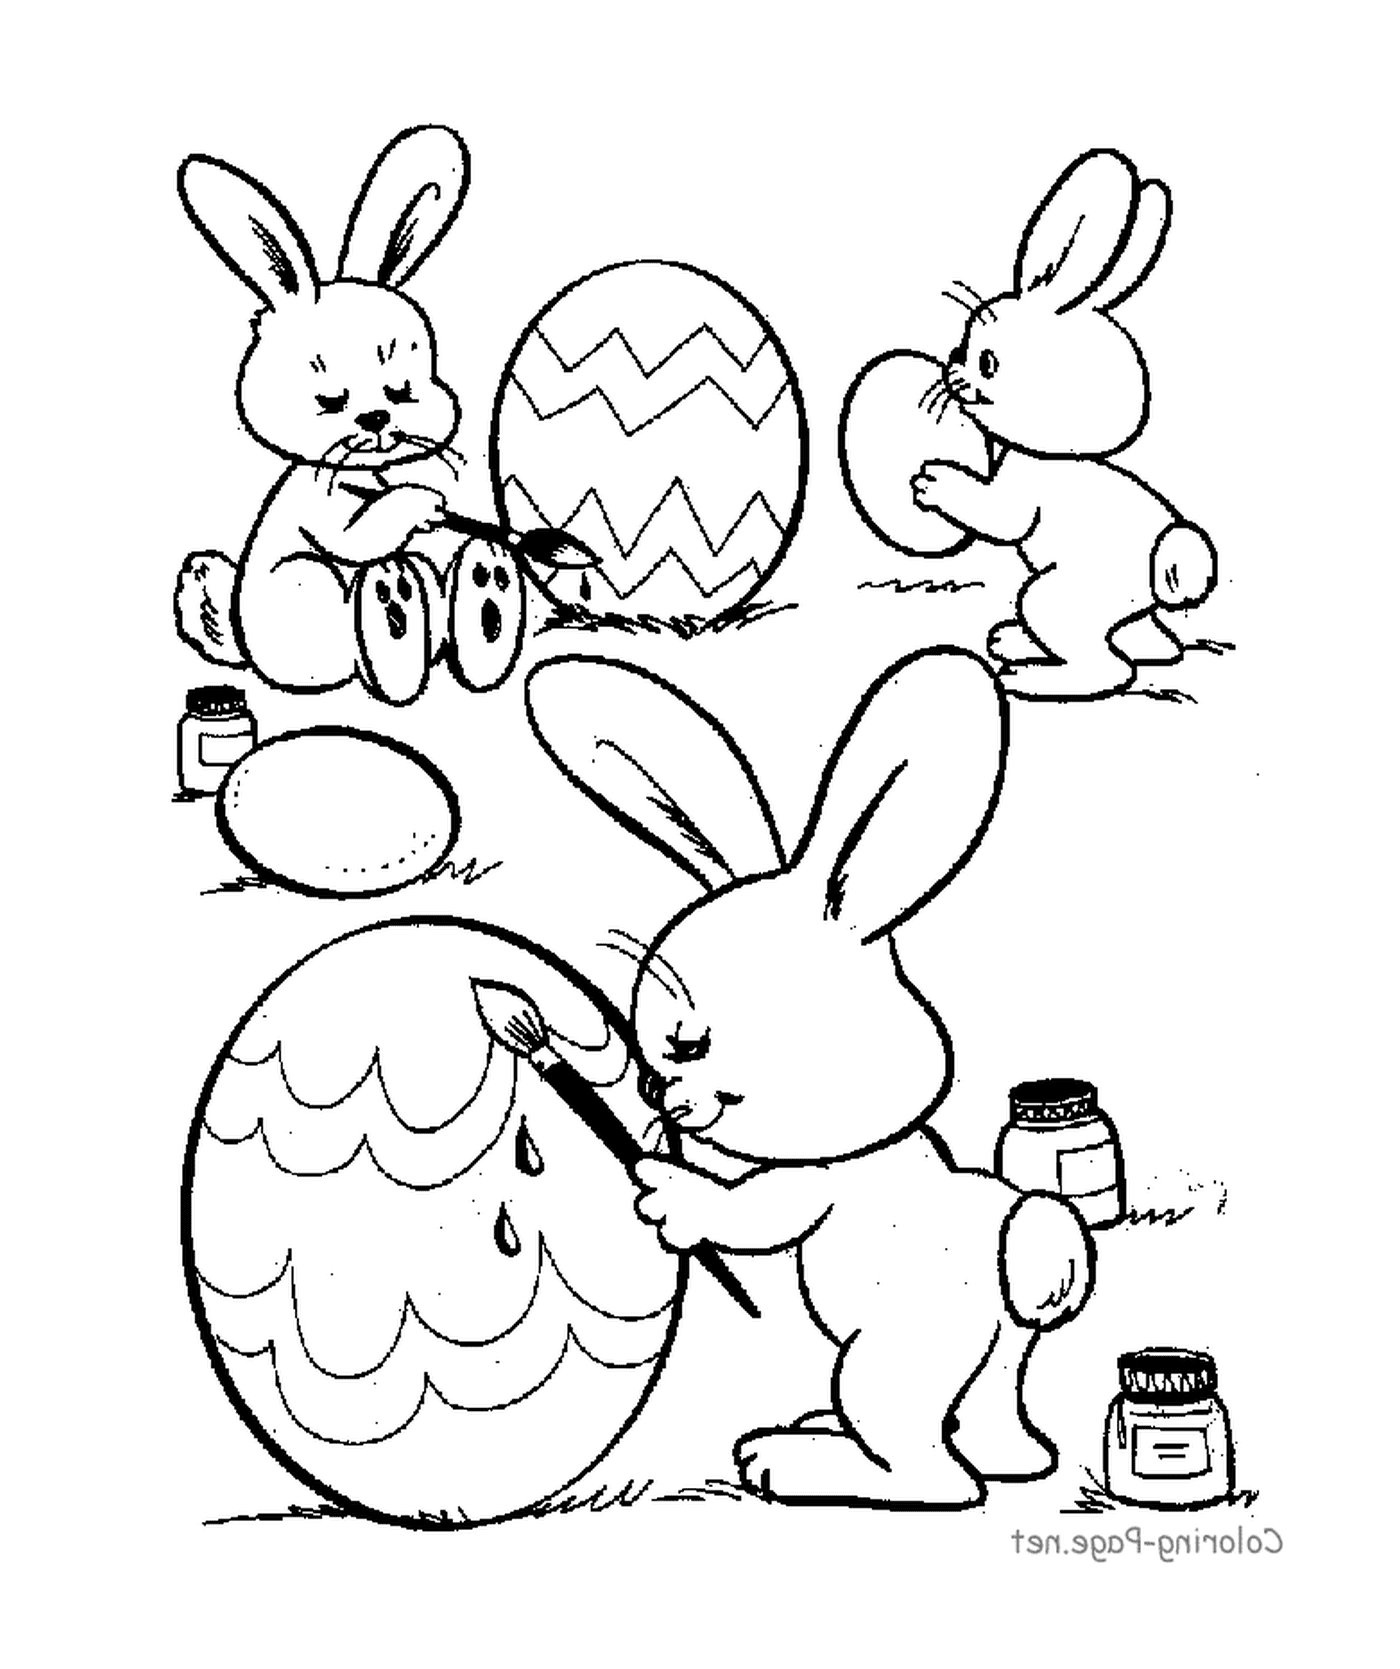  A group of rabbits painting Easter eggs 